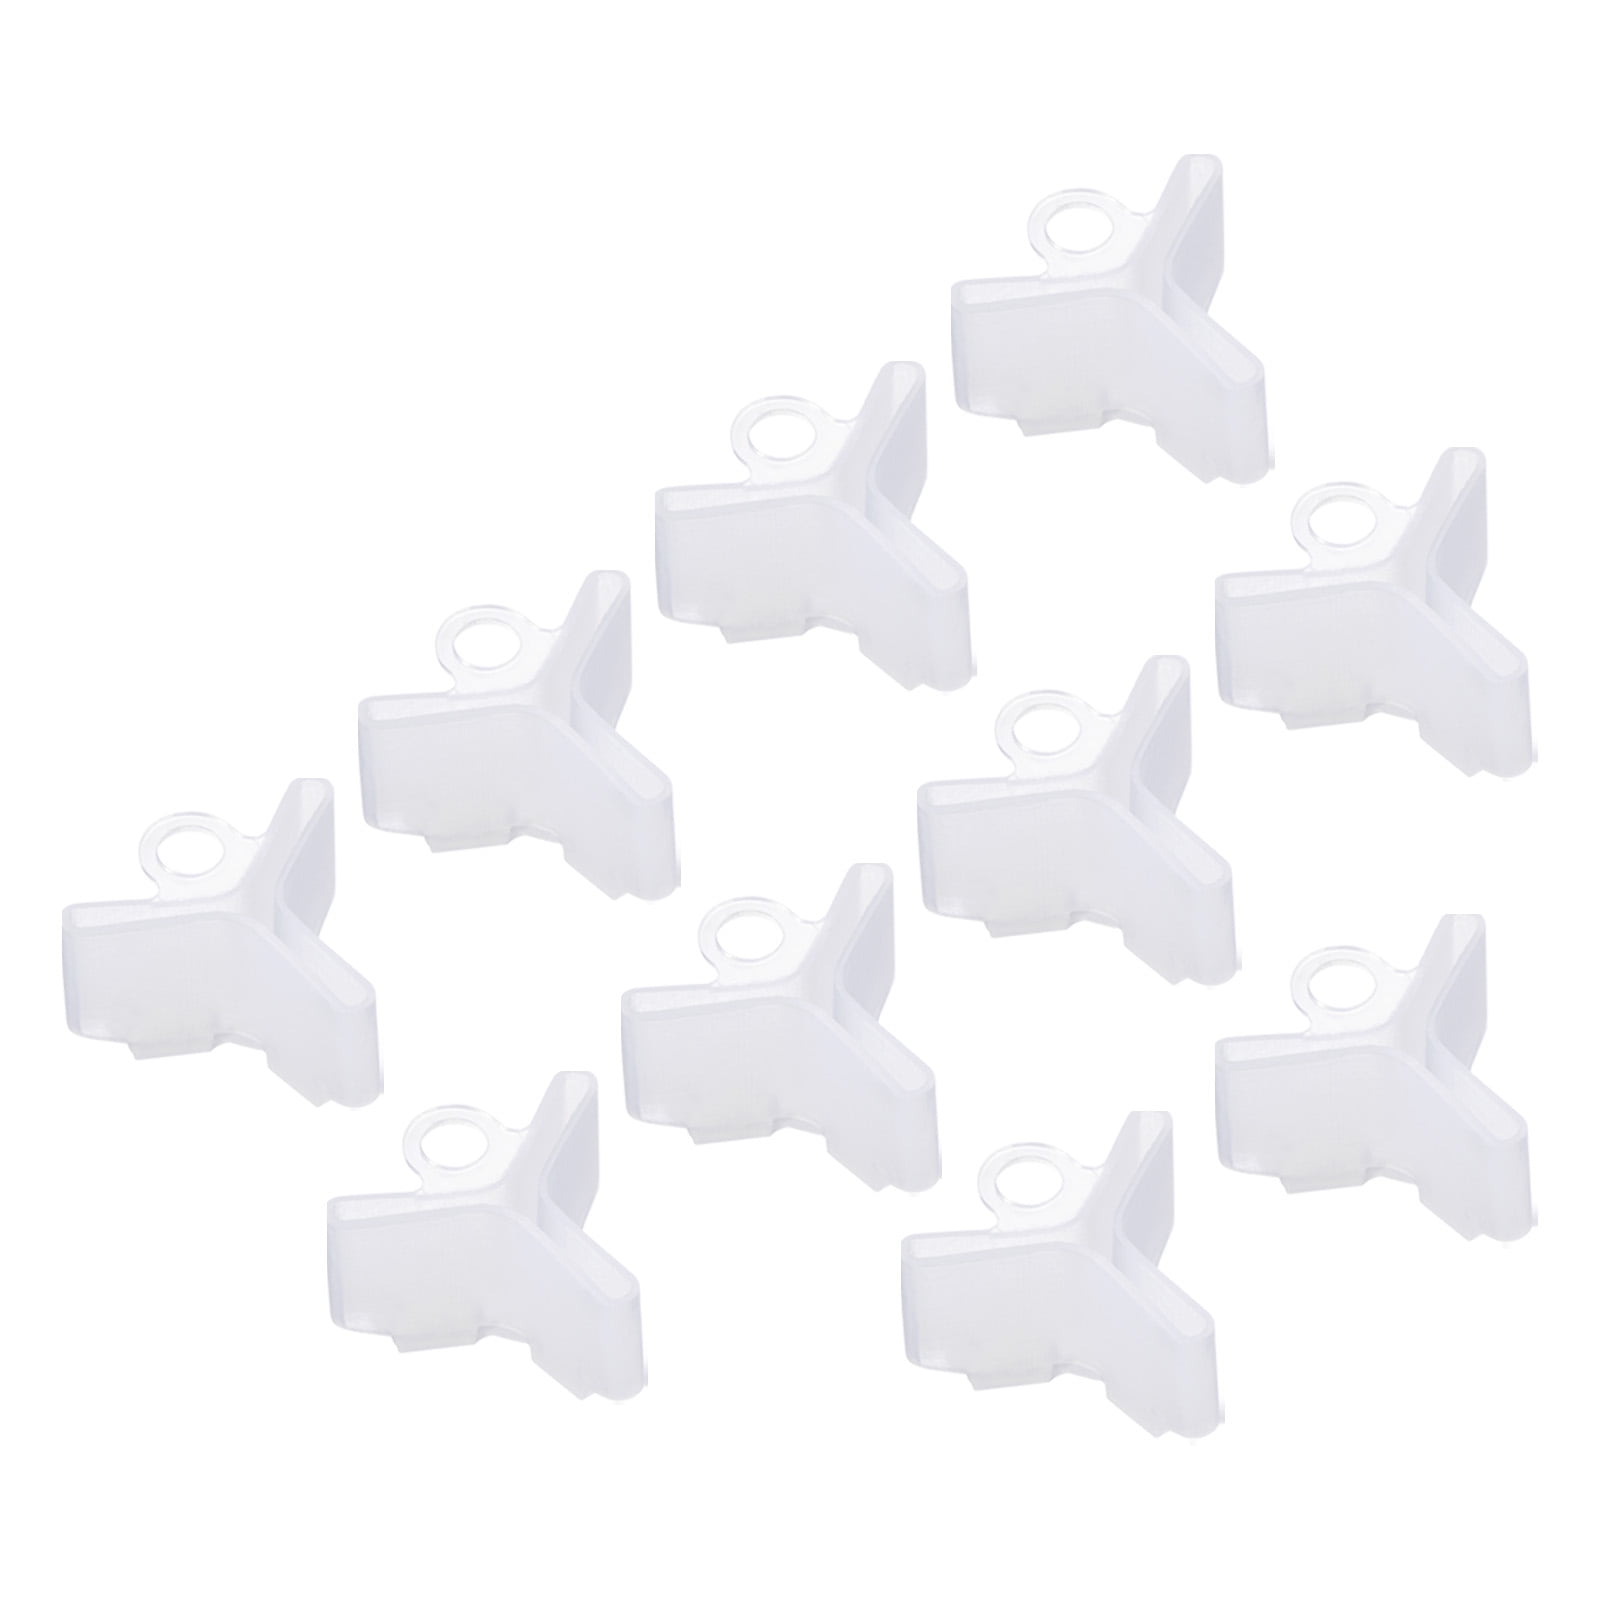 Uxcell Plastic Fishing Hook Bonnets Treble Hook Covers Fit for 1/0,2/0,  White 100 Pack